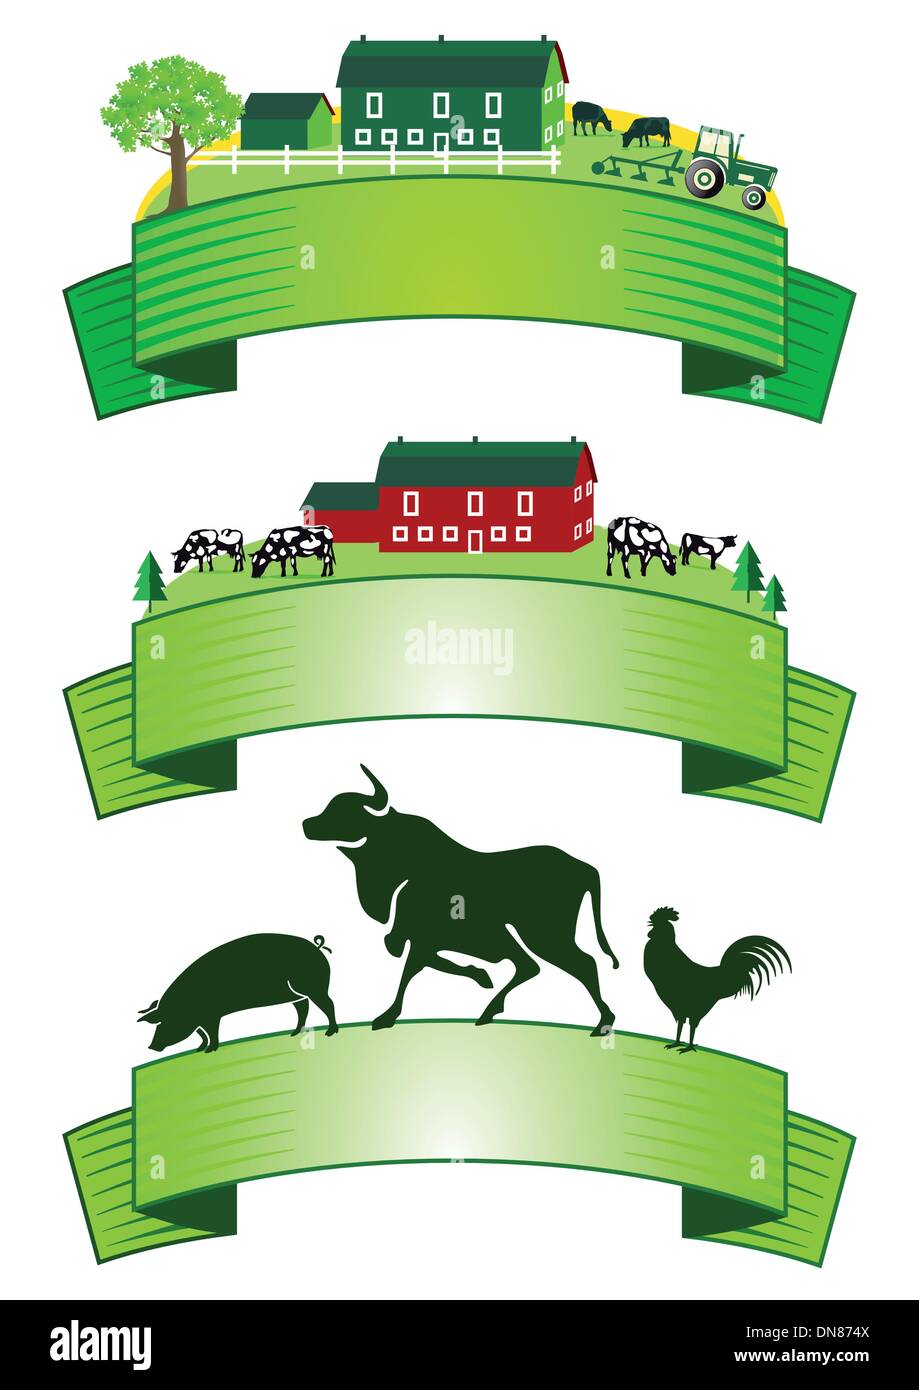 cattle breeding Agriculture Stock Vector